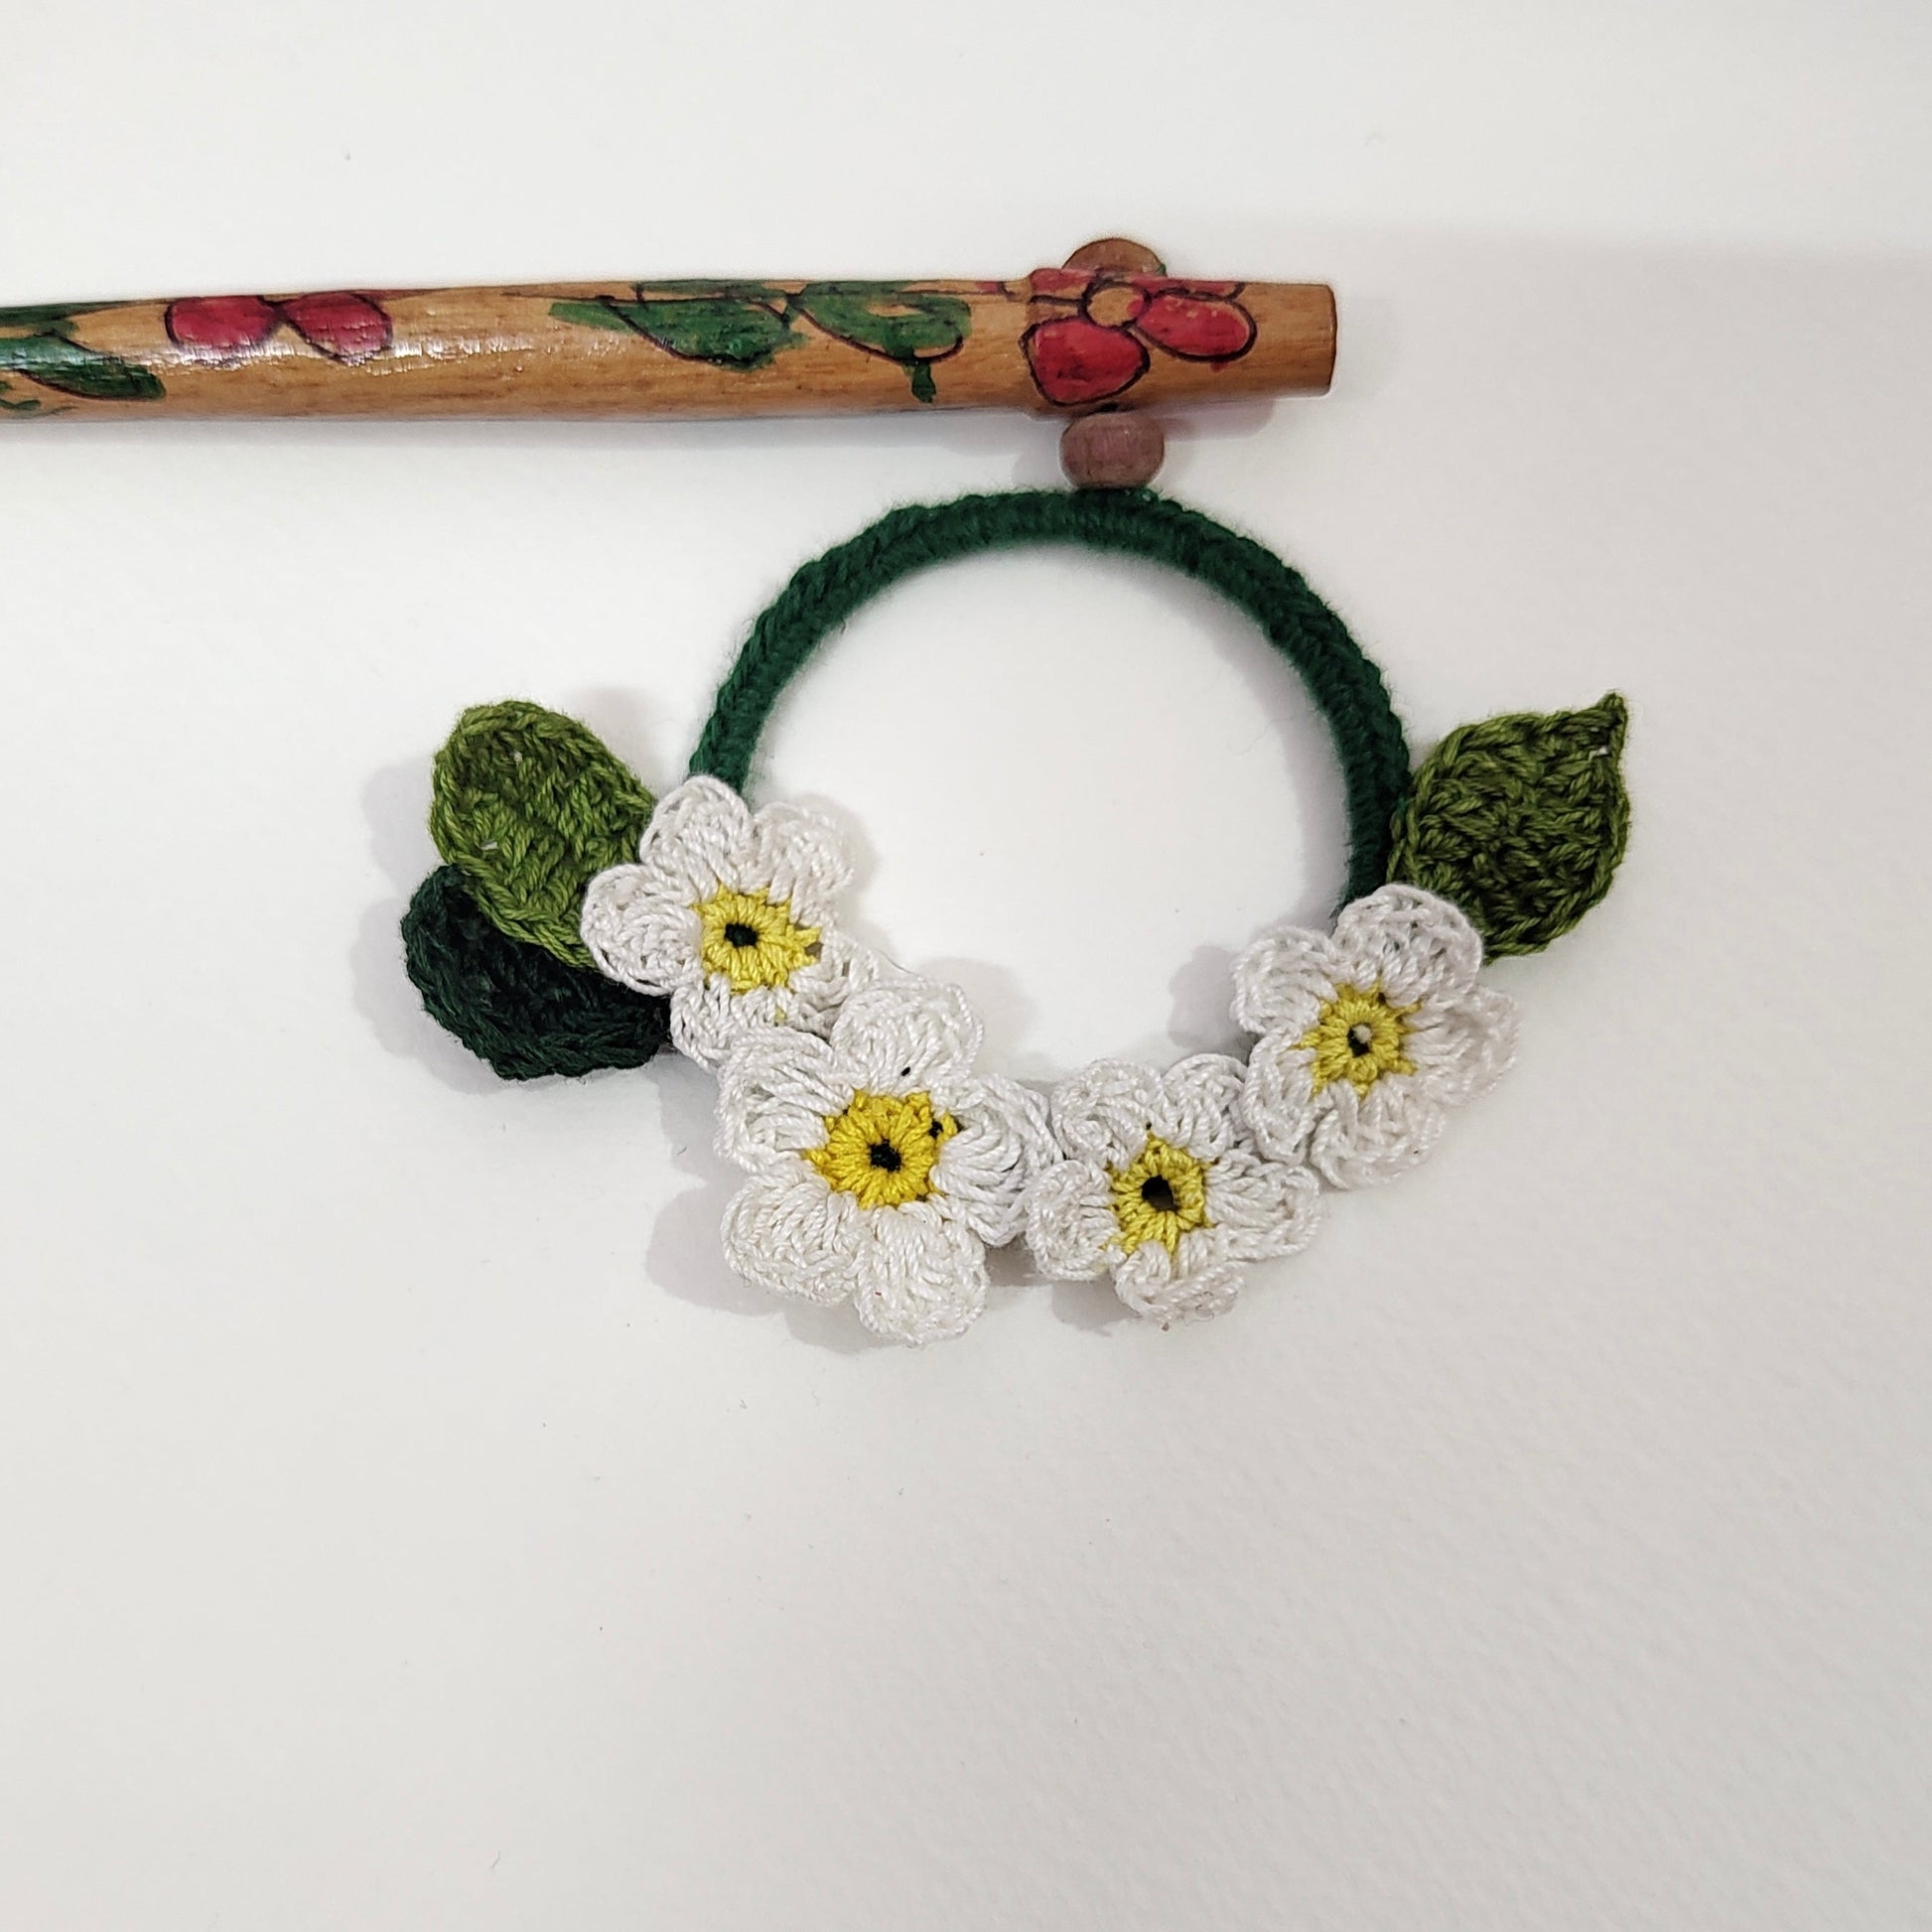 Wooden Hair Stick Daisy Off White And Green at Kamakhyaa by Ikriit'm. This item is Accessories, Cotton Yarn, Green, Hair Accessory, Ikriit'm, Off White, Wood